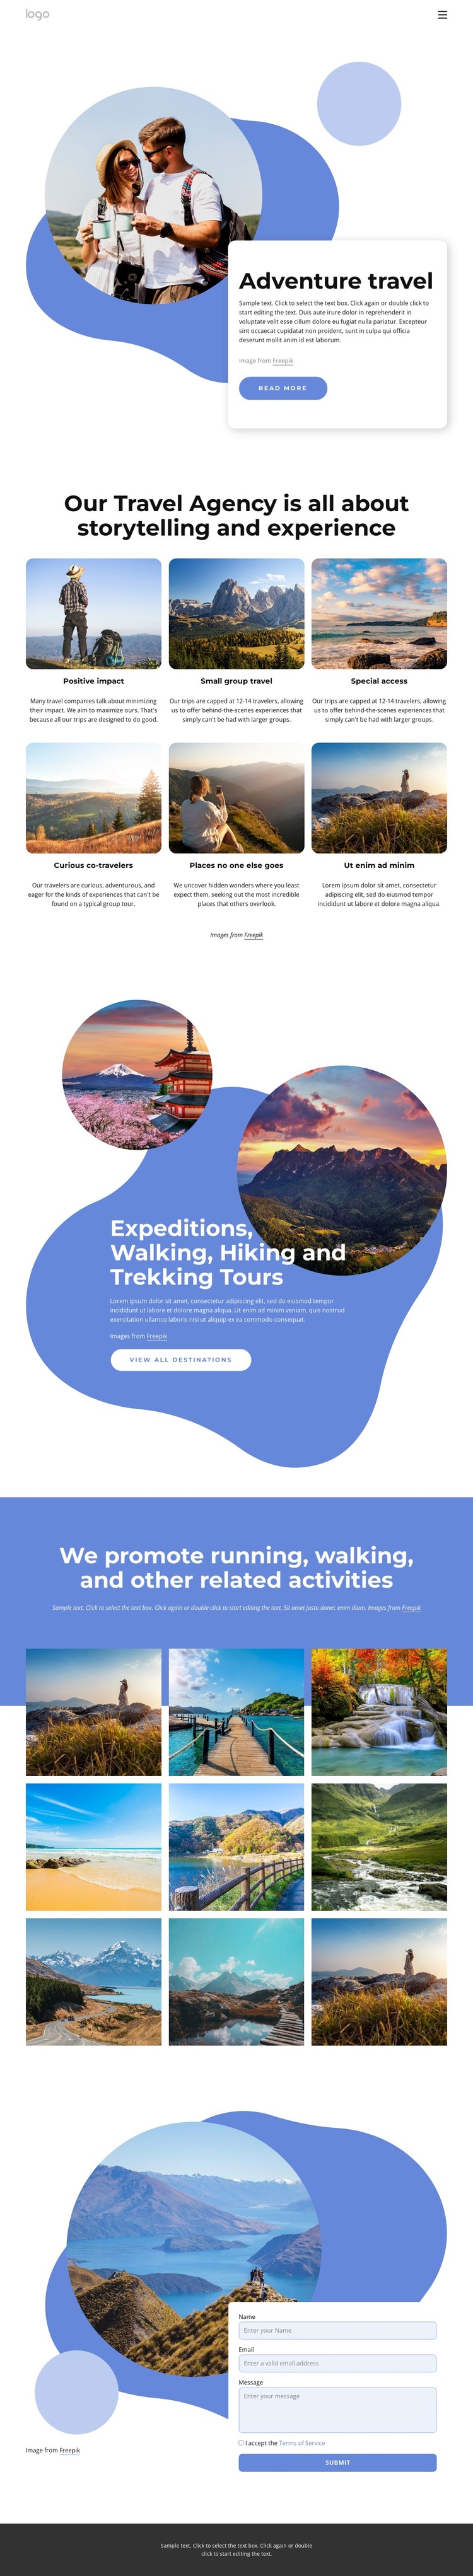 Agency specializing in luxury adventure travel HTML5 Template